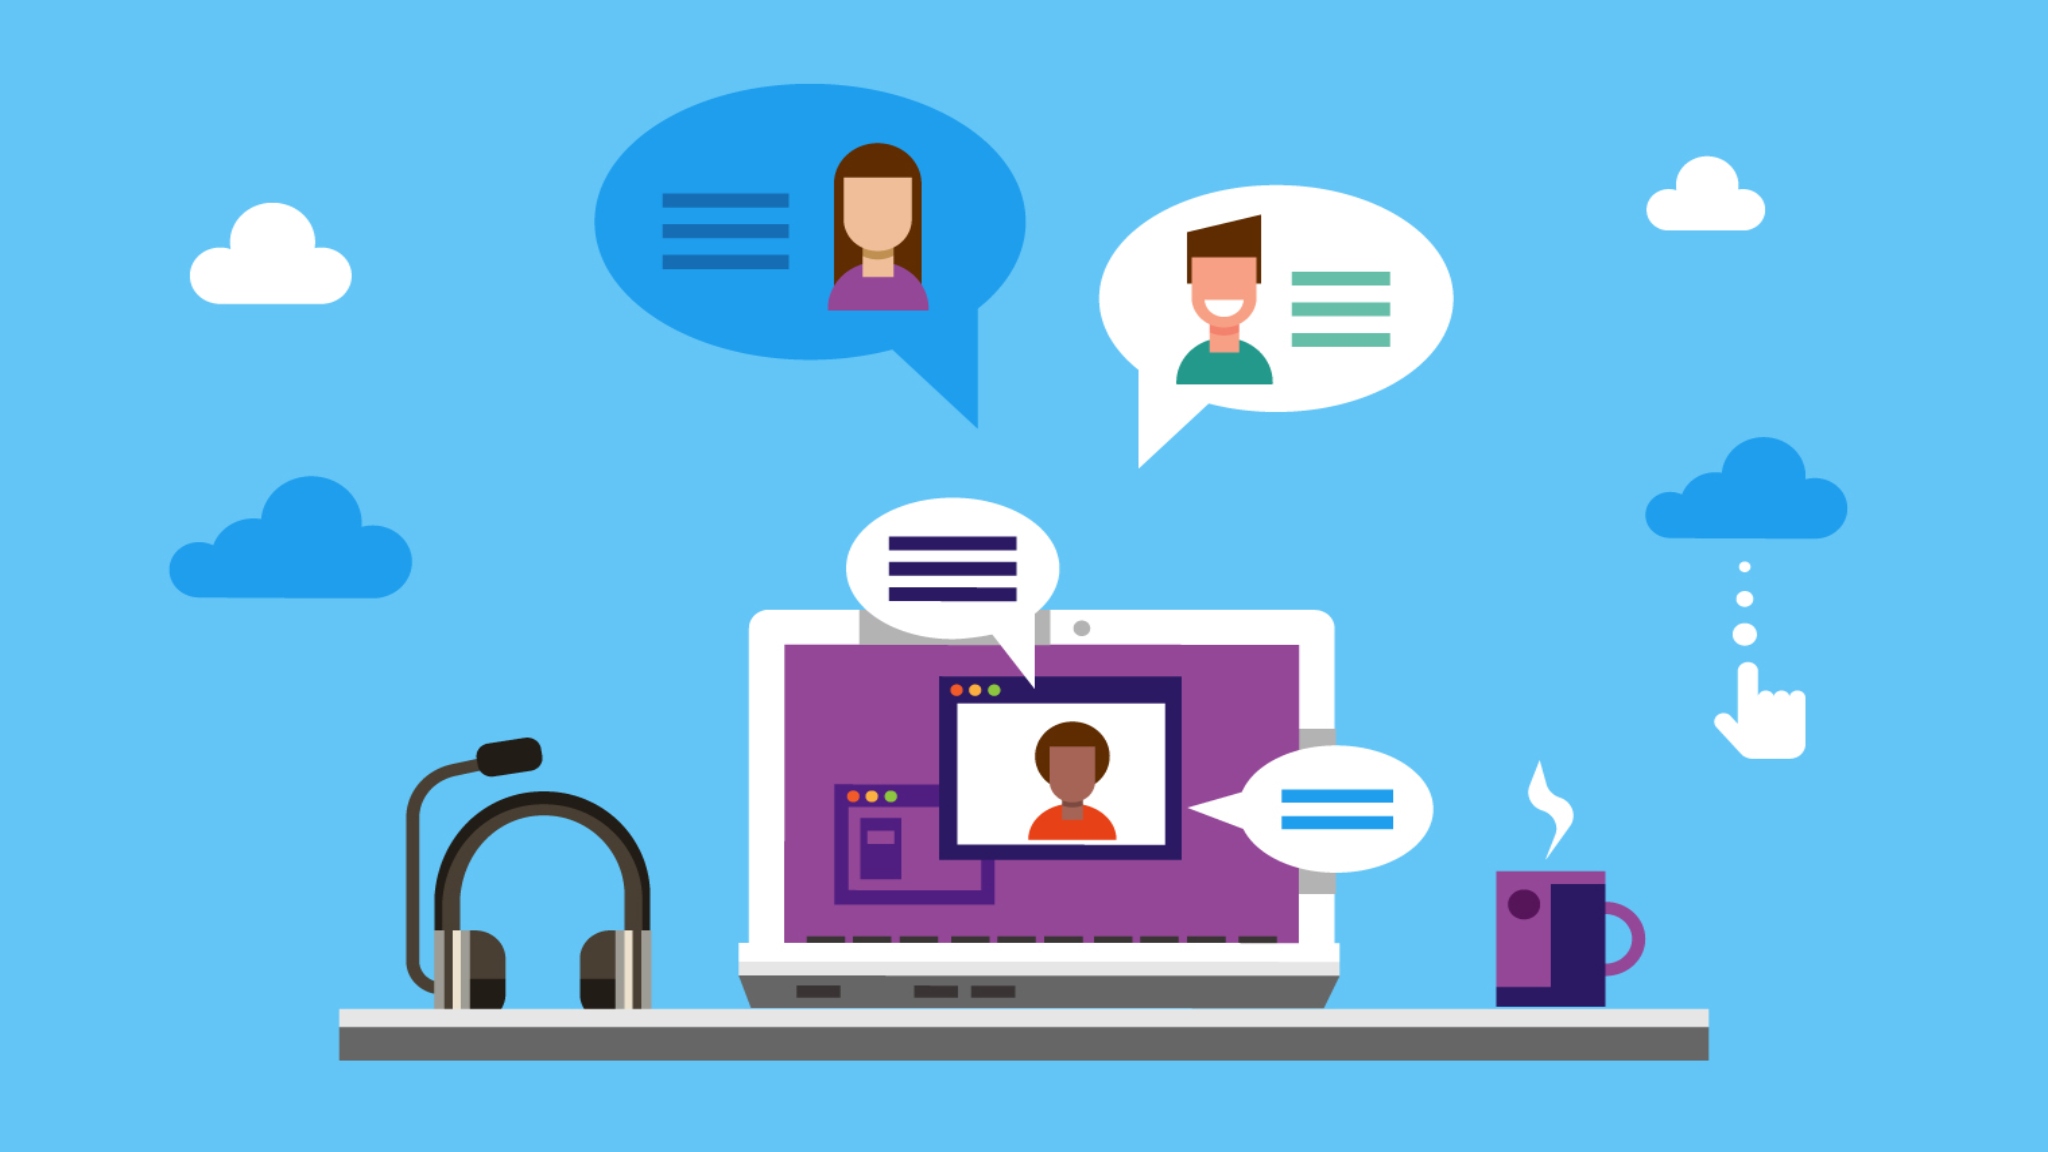 5 Communication Tips When Collaborating Online for Work